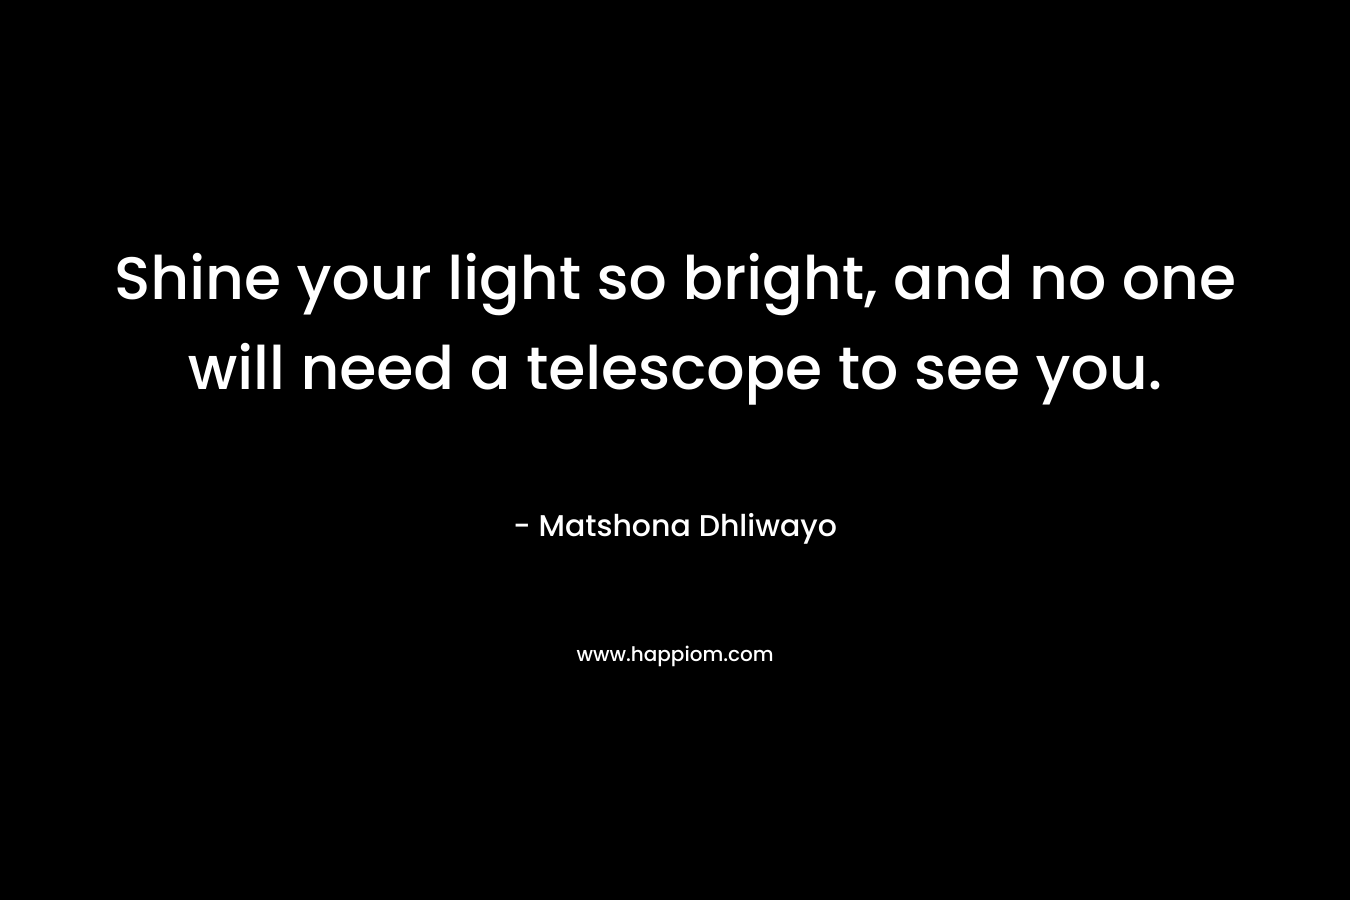 Shine your light so bright, and no one will need a telescope to see you. – Matshona Dhliwayo